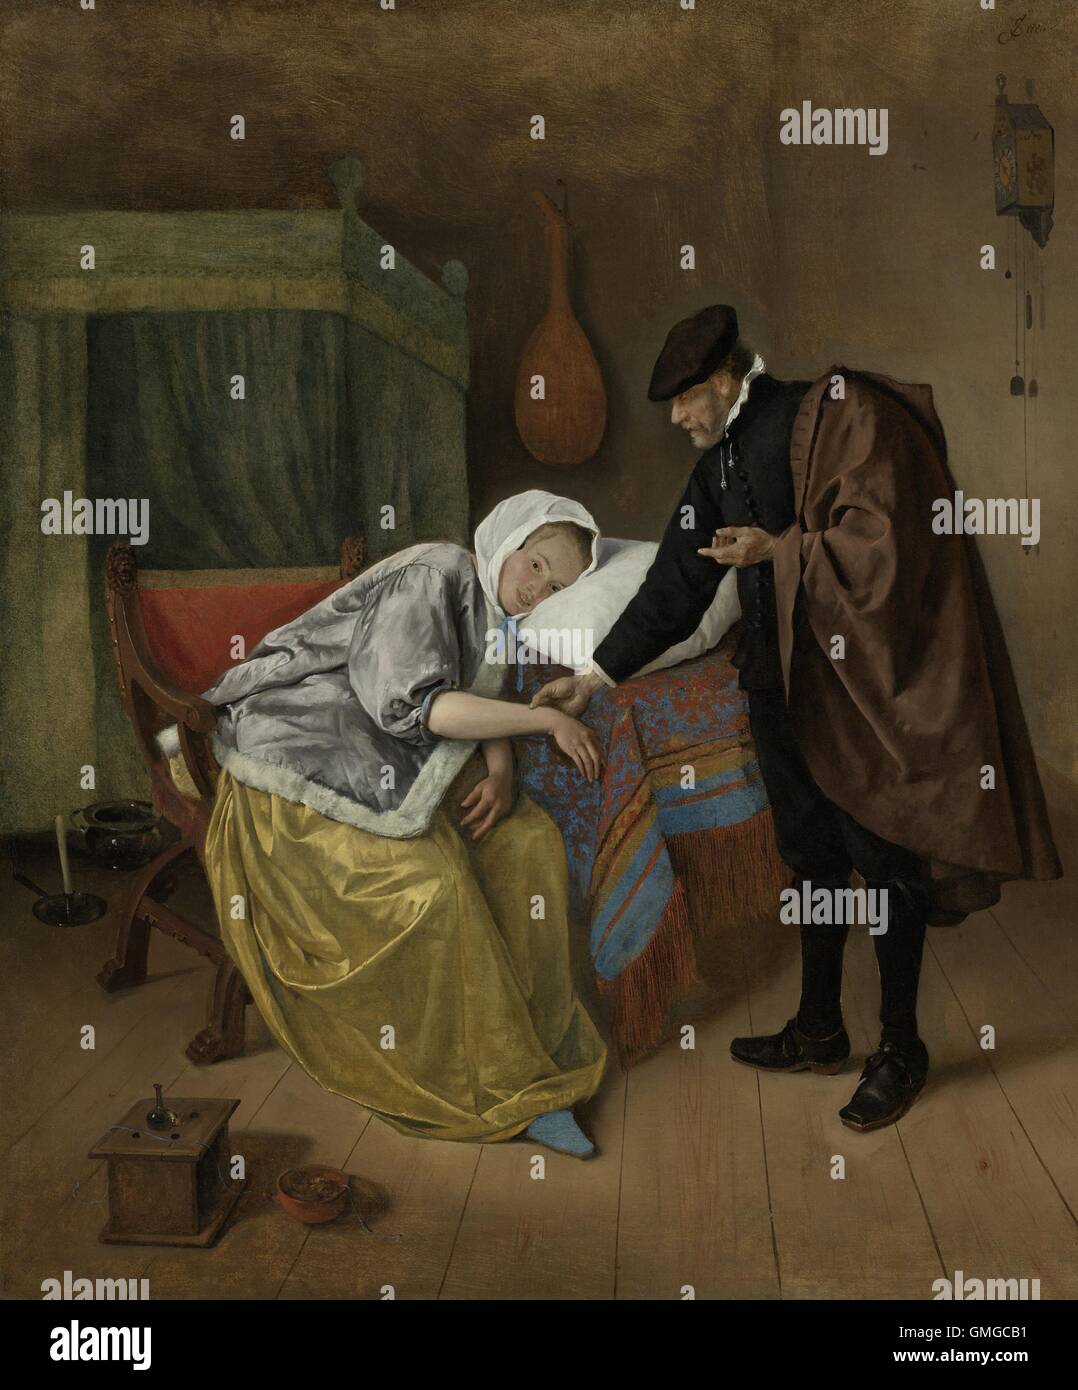 The Sick Woman, by Jan Steen, c. 1663-66, Dutch painting, oil on canvas. The doctor is a 'Quack', who has placed a bit of the patient's blue fabric in a brazier to make his diagnosis. The charlatan's old-fashioned attire characterizes him as a comic character (BSLOC 2016 3 201) Stock Photo